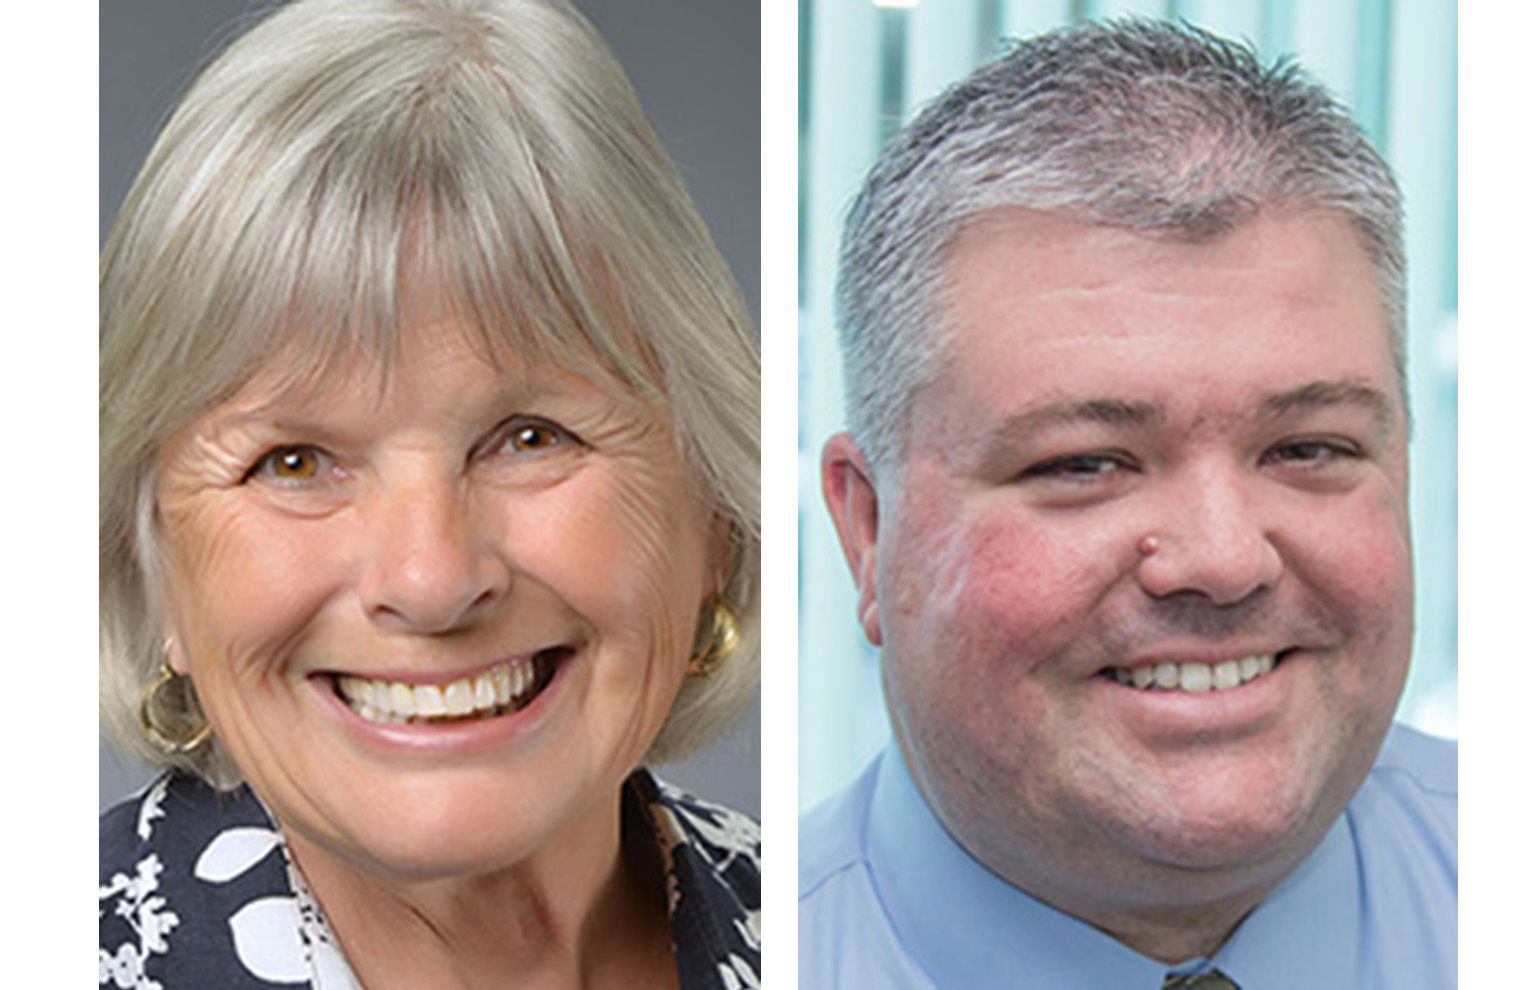 Washougal City Councilor Joyce Lindsay faces a challenge from Jason Dodge in the November 2015 election.